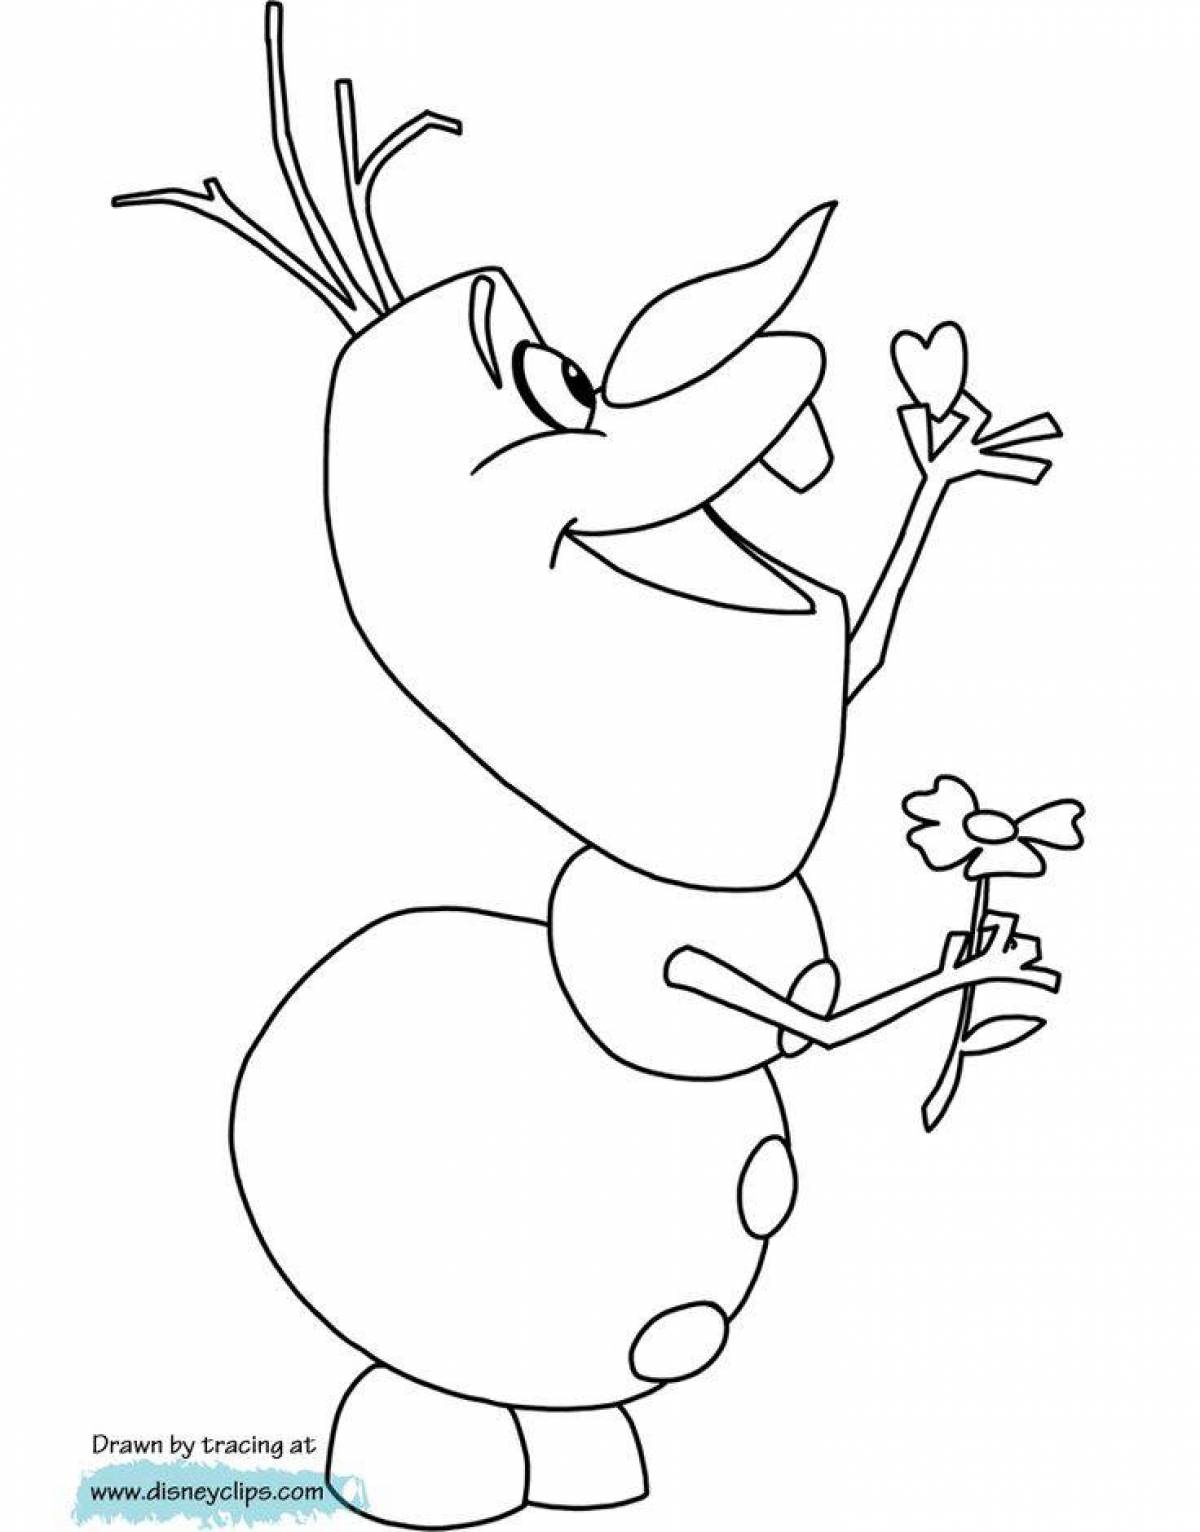 Coloring book smiling olaf